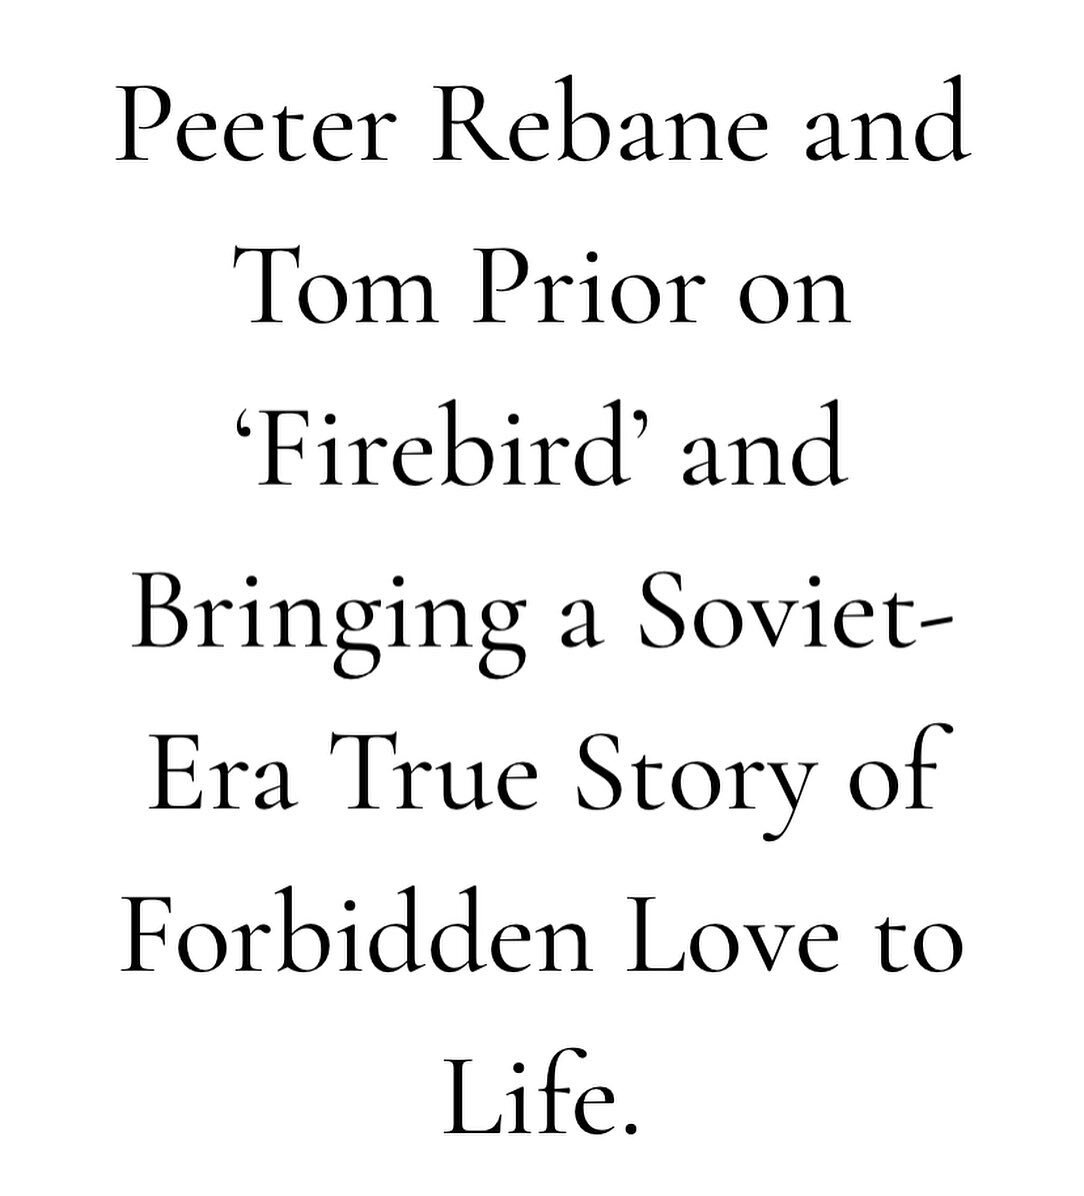 I recently sat down with Peeter Rebane and Tom Prior to discuses their new film, &ldquo;Firebird.&rdquo; Rebane and Prior chatted with me about everything from the challenges of making an independently financed period piece to the memoir that inspire